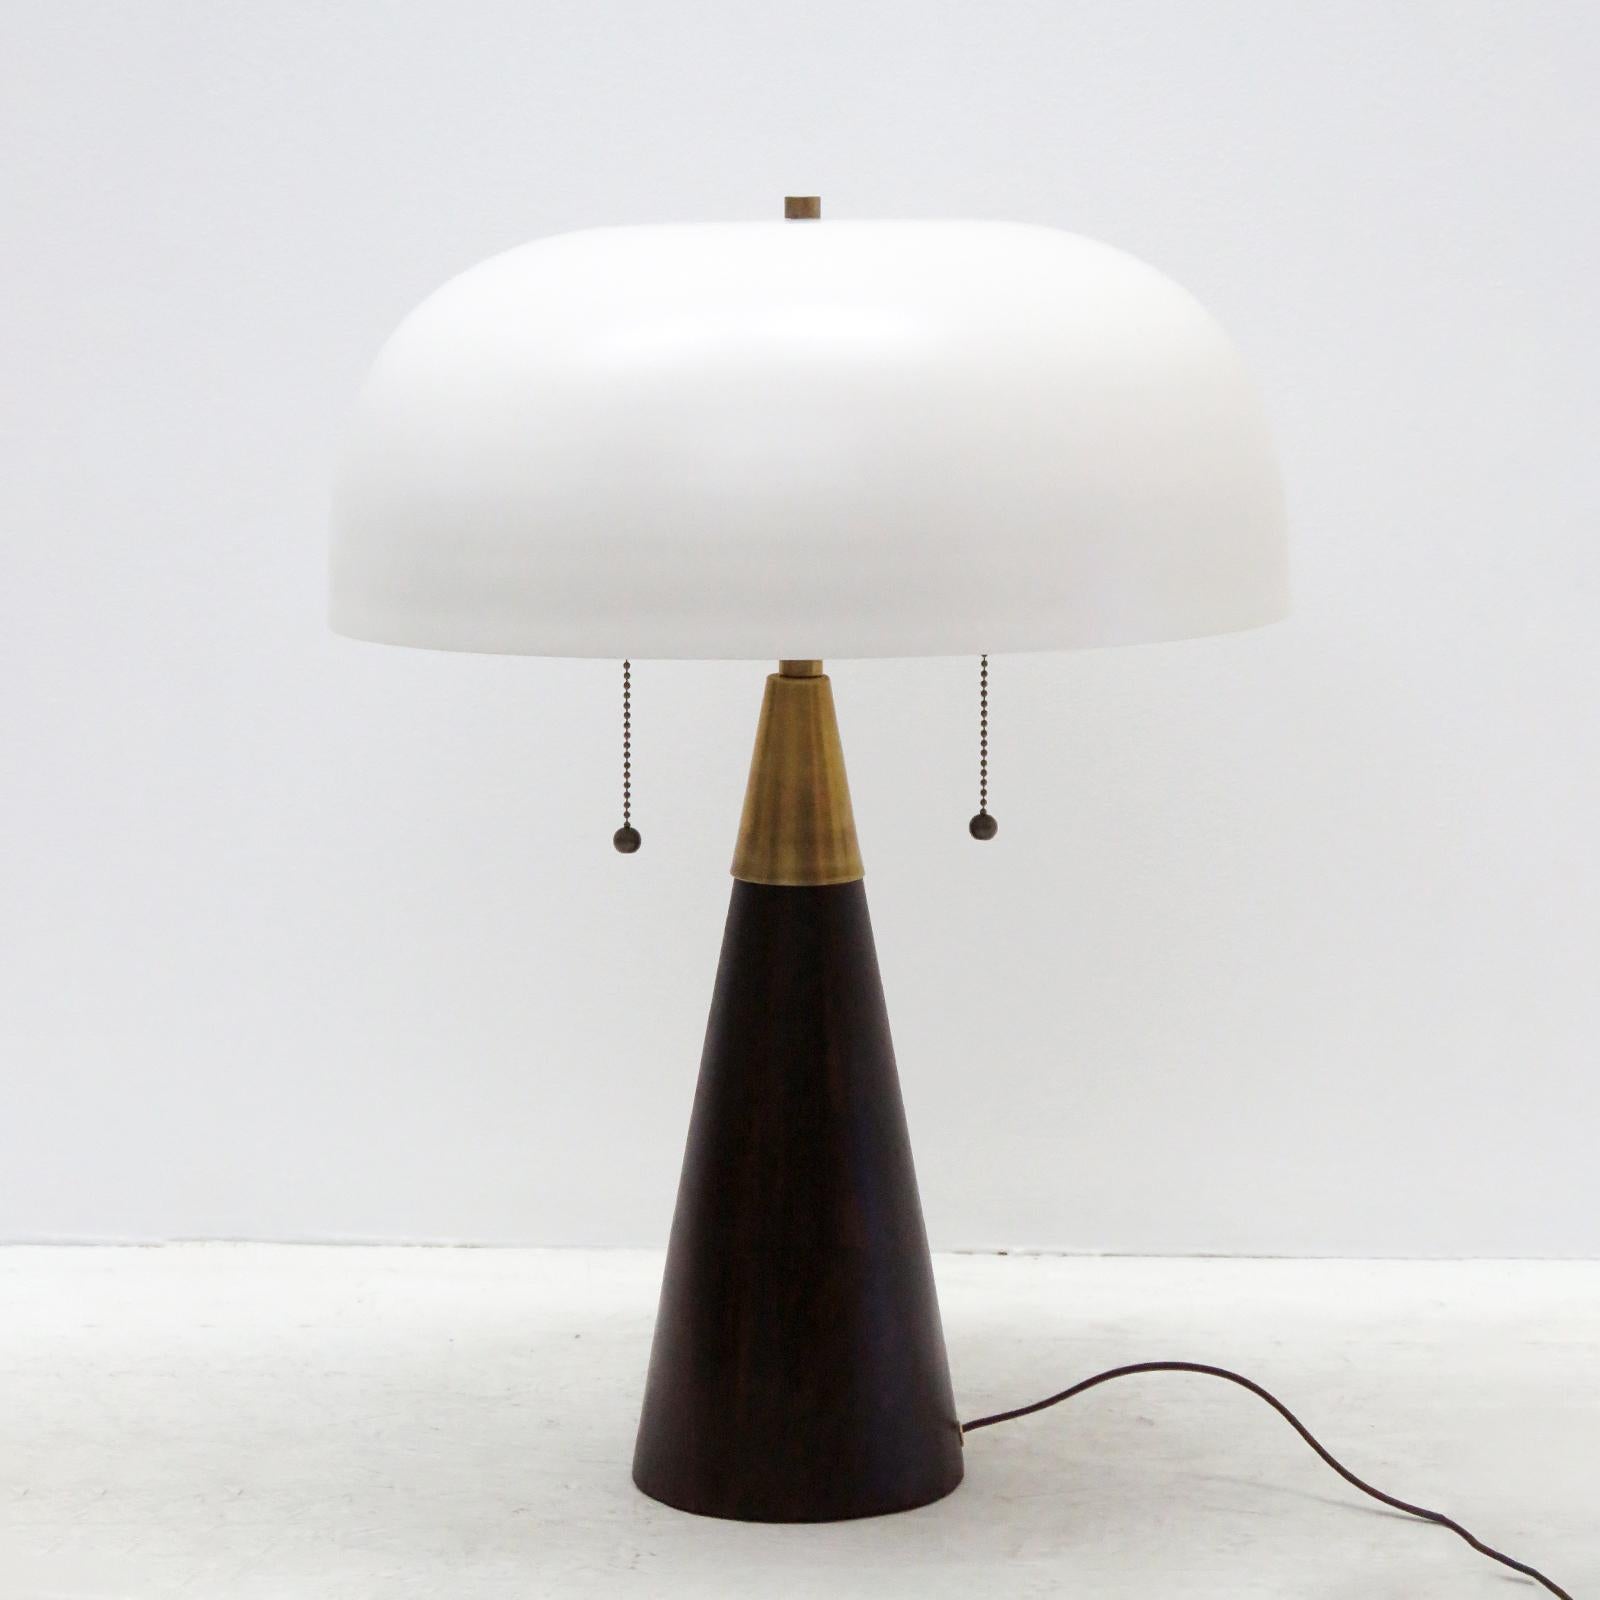 Wonderful organic modern table lamps by Alvaro Benitez for Gallery L7, with a stained wood base, a large off-white powder-coated metal shade and brass hardware. Dual bulb setup with two individual pull switches and a general in-line on/off switch.